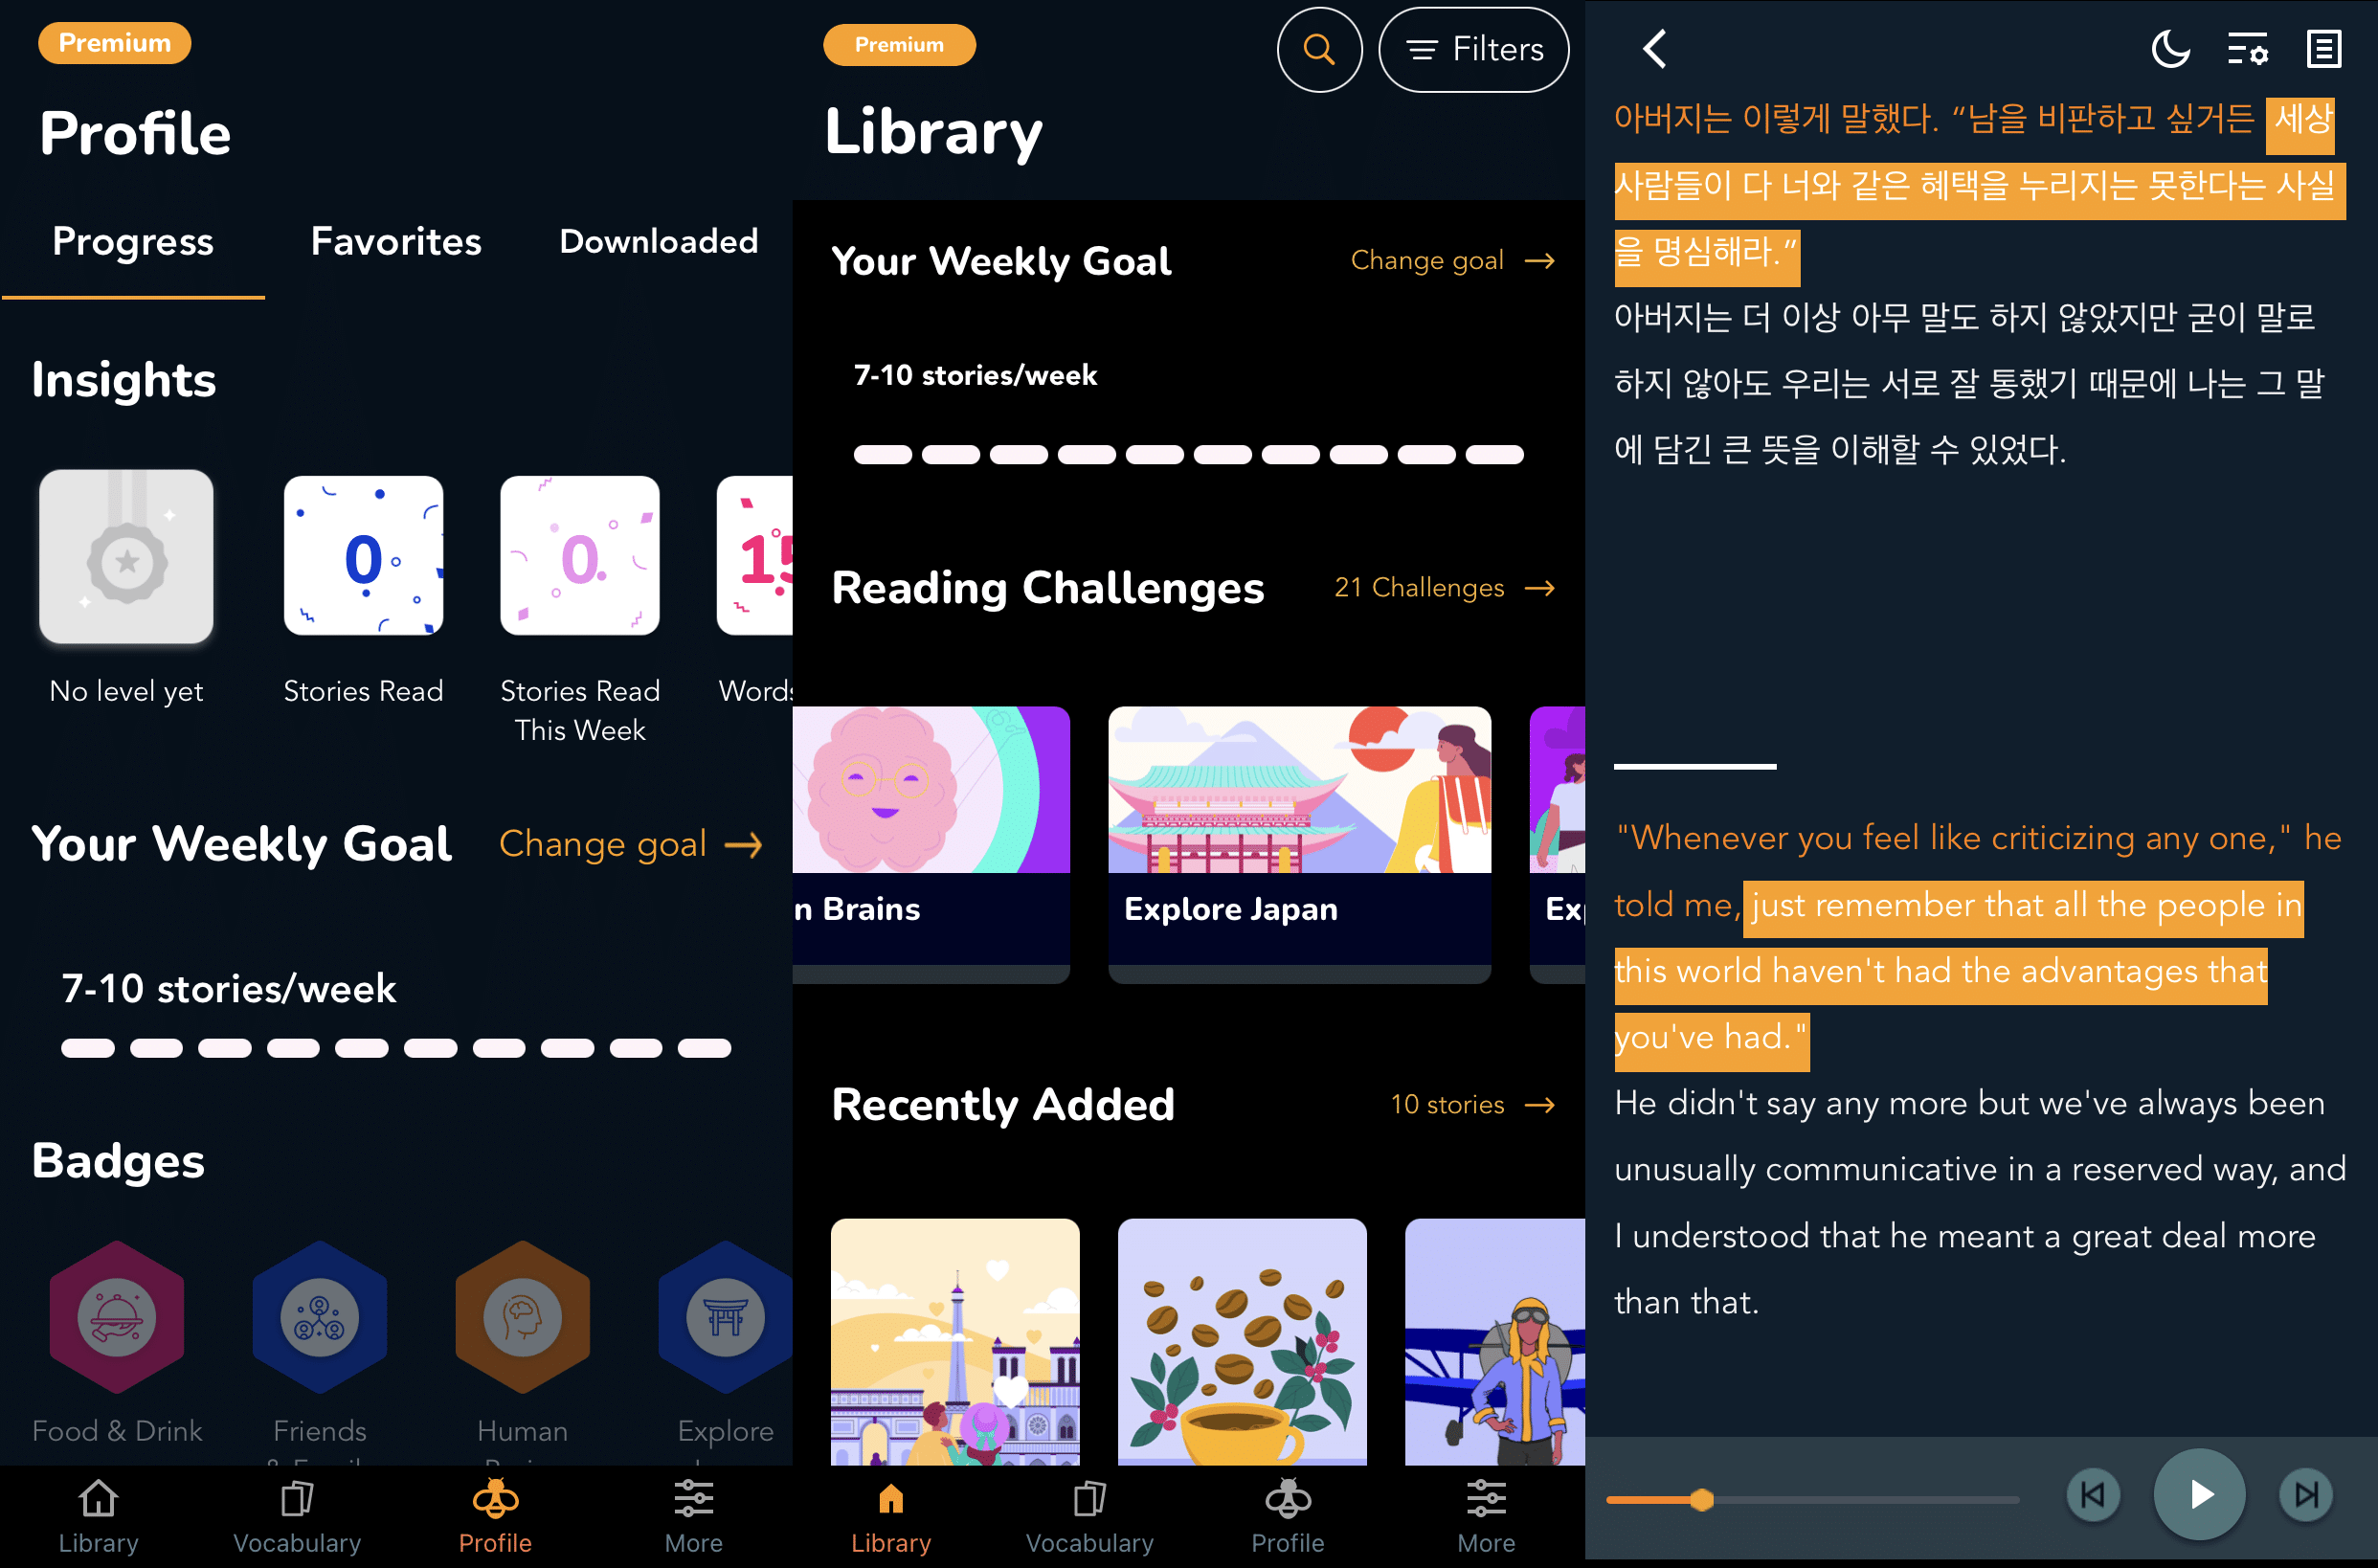 Beelinguapp profile, library, and side-by-side language learning